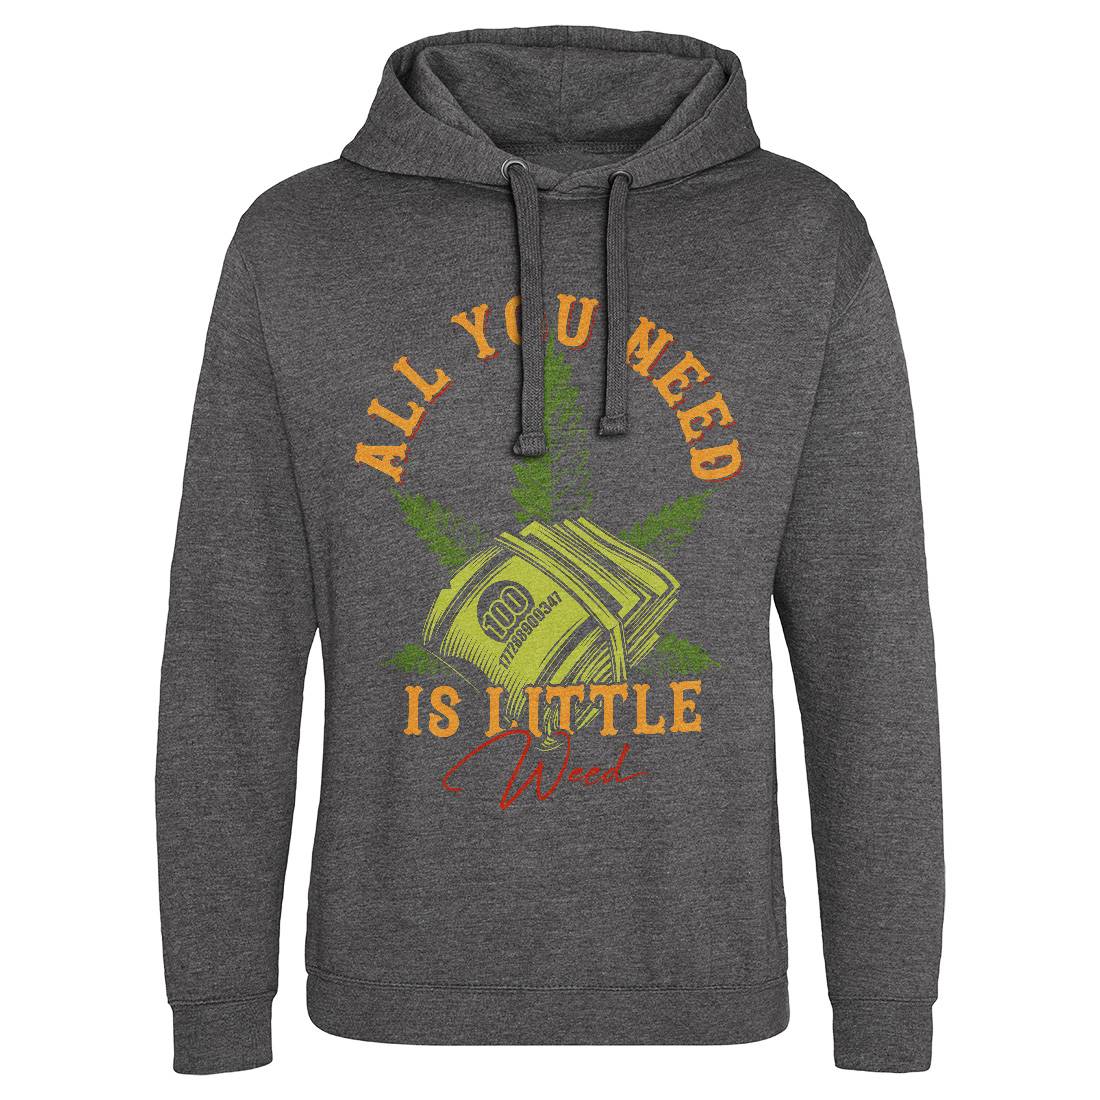 All You Need Mens Hoodie Without Pocket Drugs B809